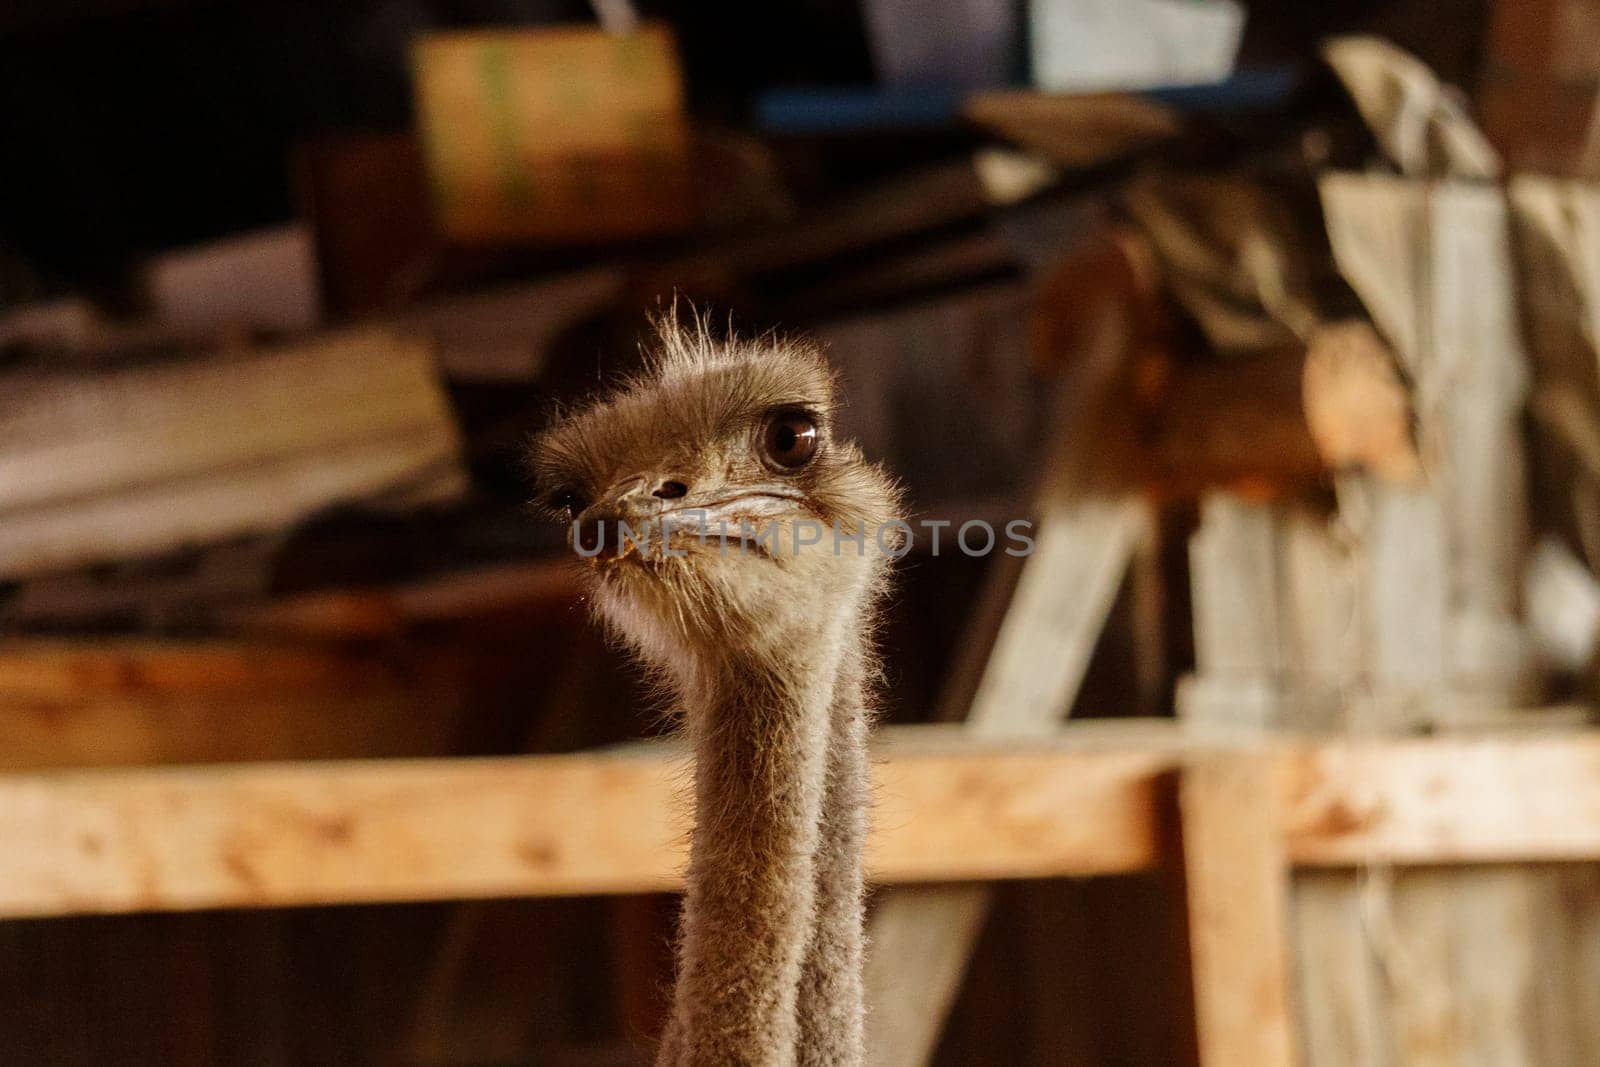 Ostriches standing in front of a building on an ostrich farm. Selective focus by darksoul72